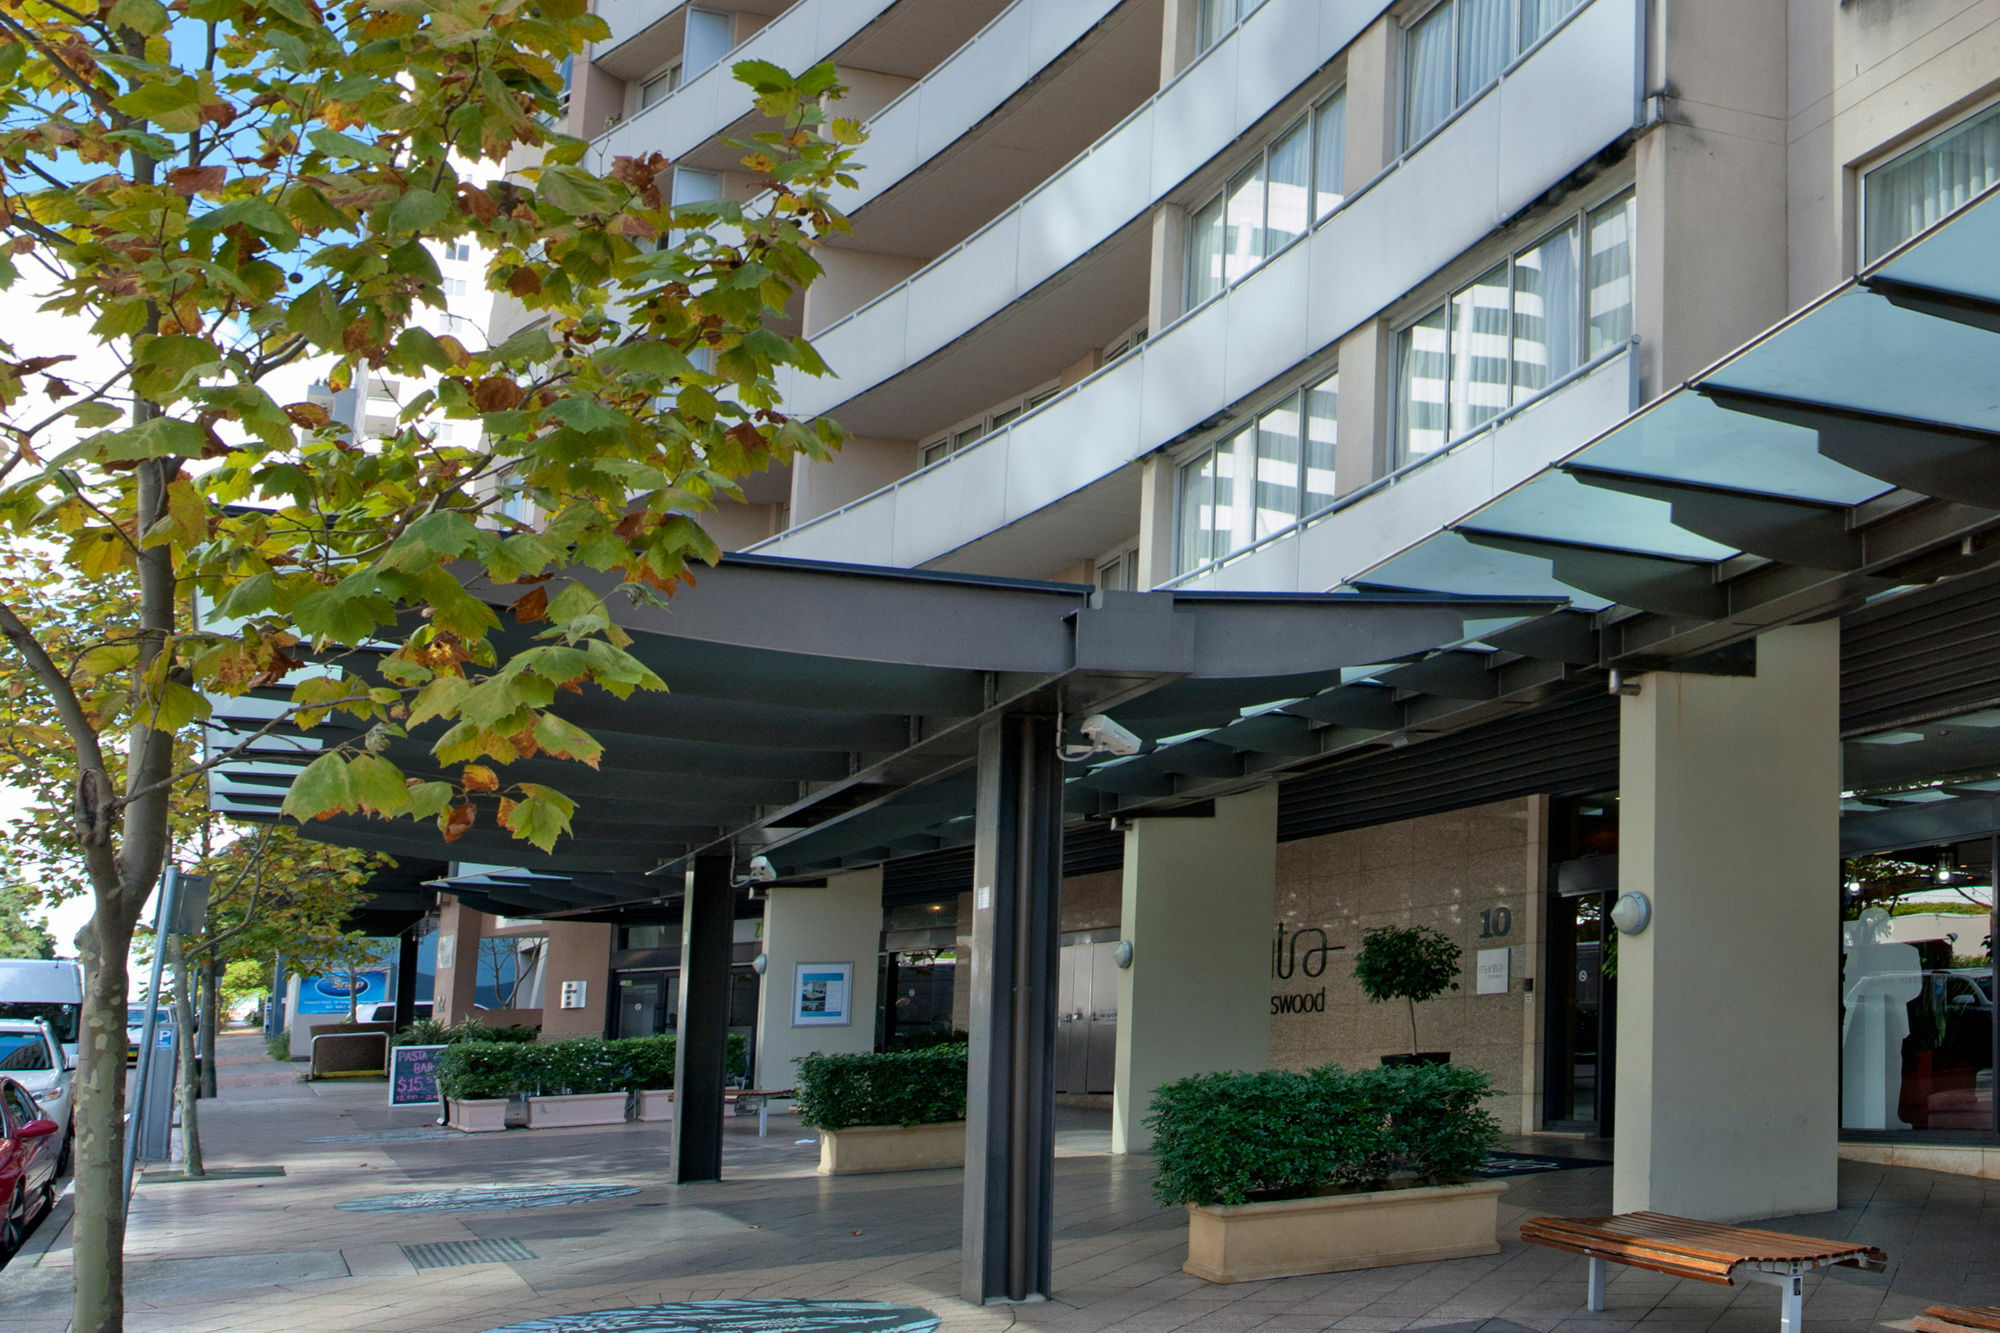 Mantra Chatswood Sidney Exterior foto